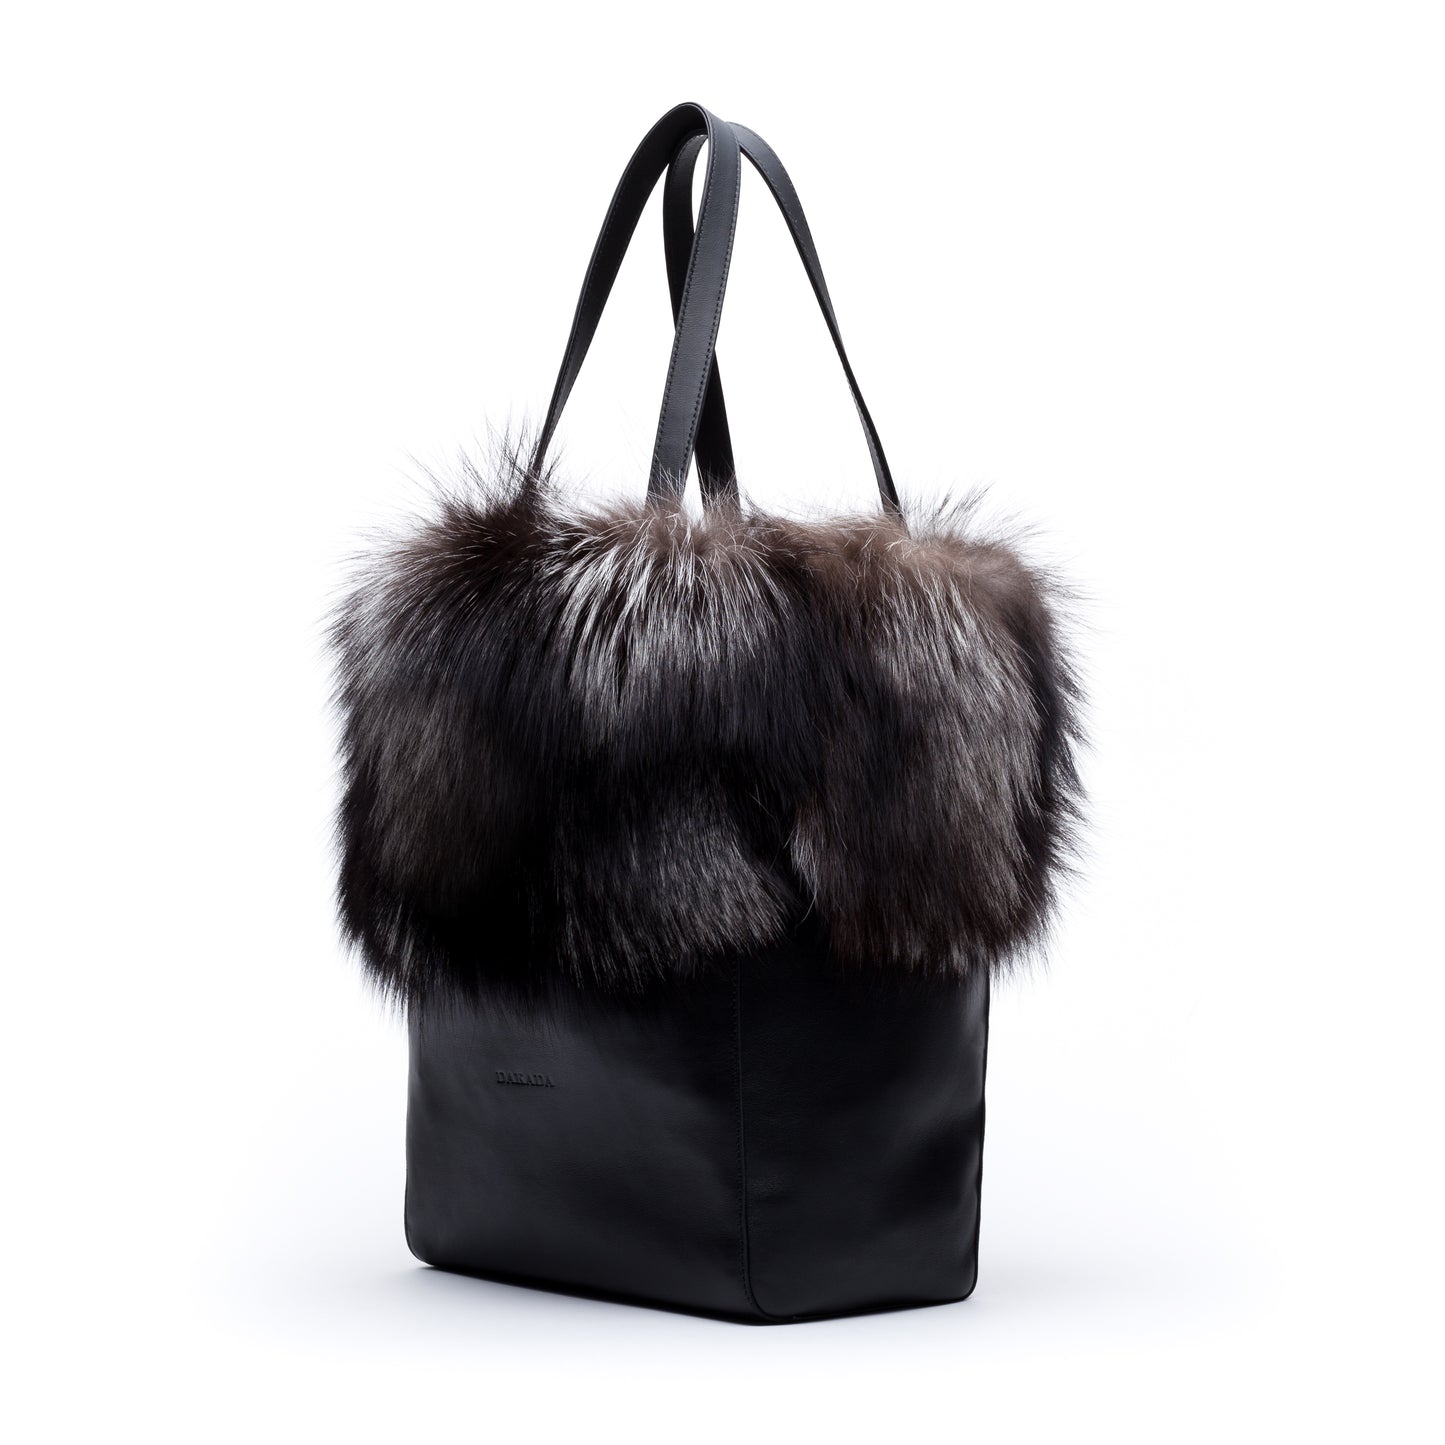 Kaley- Black Leather Tote with Silver Fox